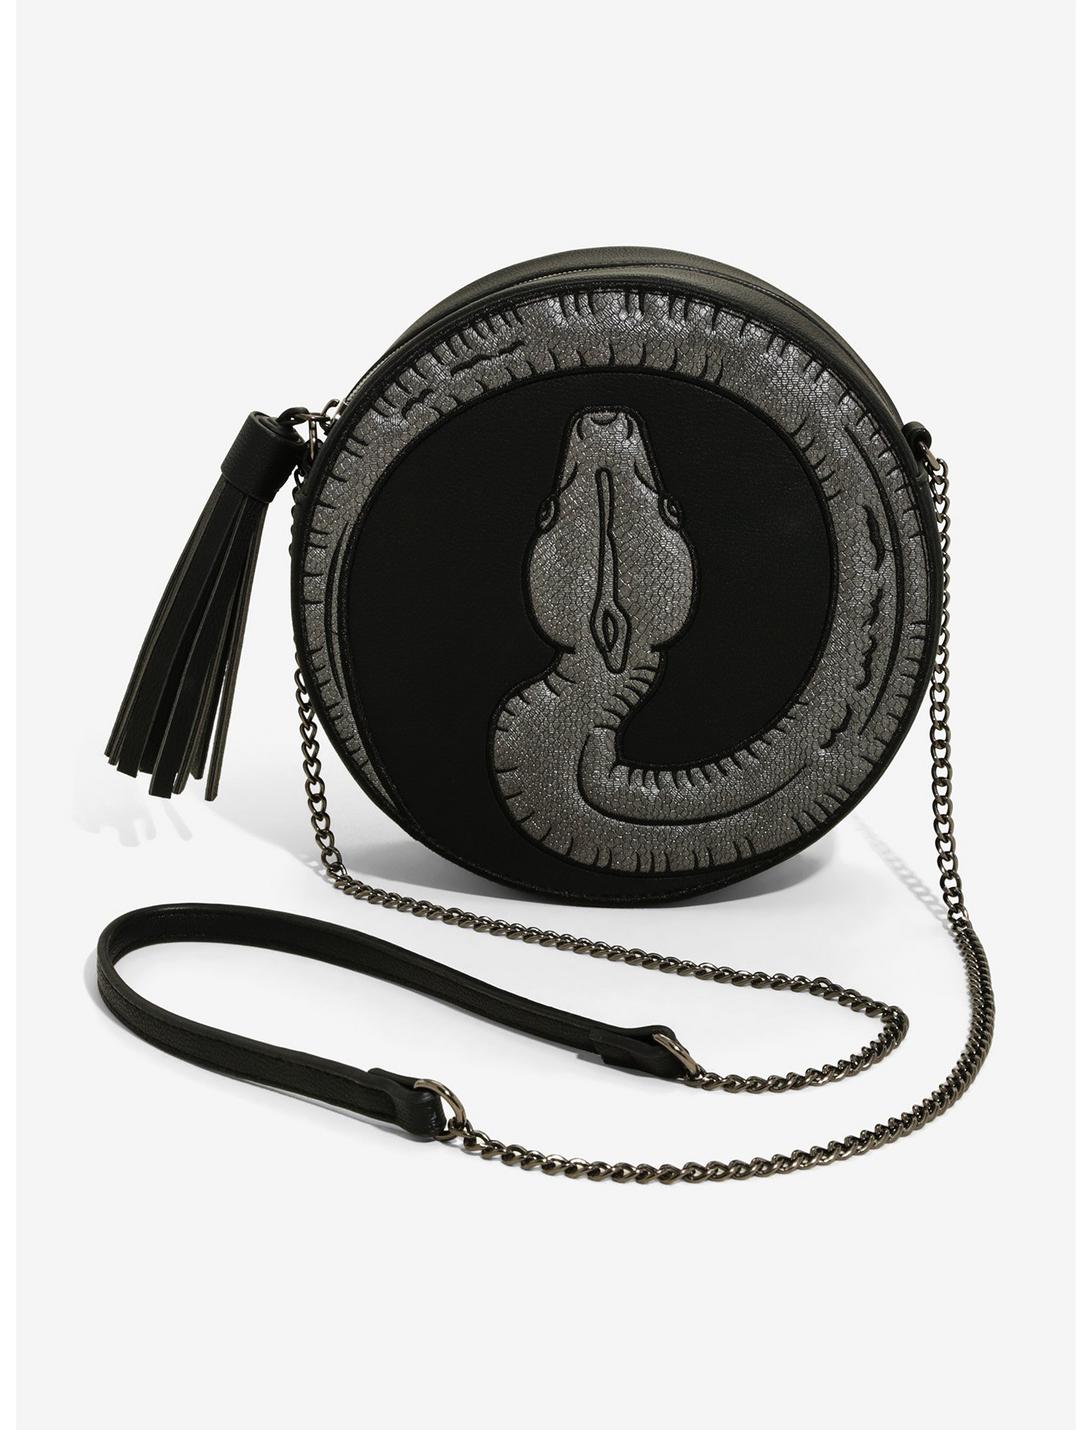 Danielle Nicole Harry Potter Horcrux Collection Nagini Round Crossbody Bag - BoxLunch Exclusive, , hi-res